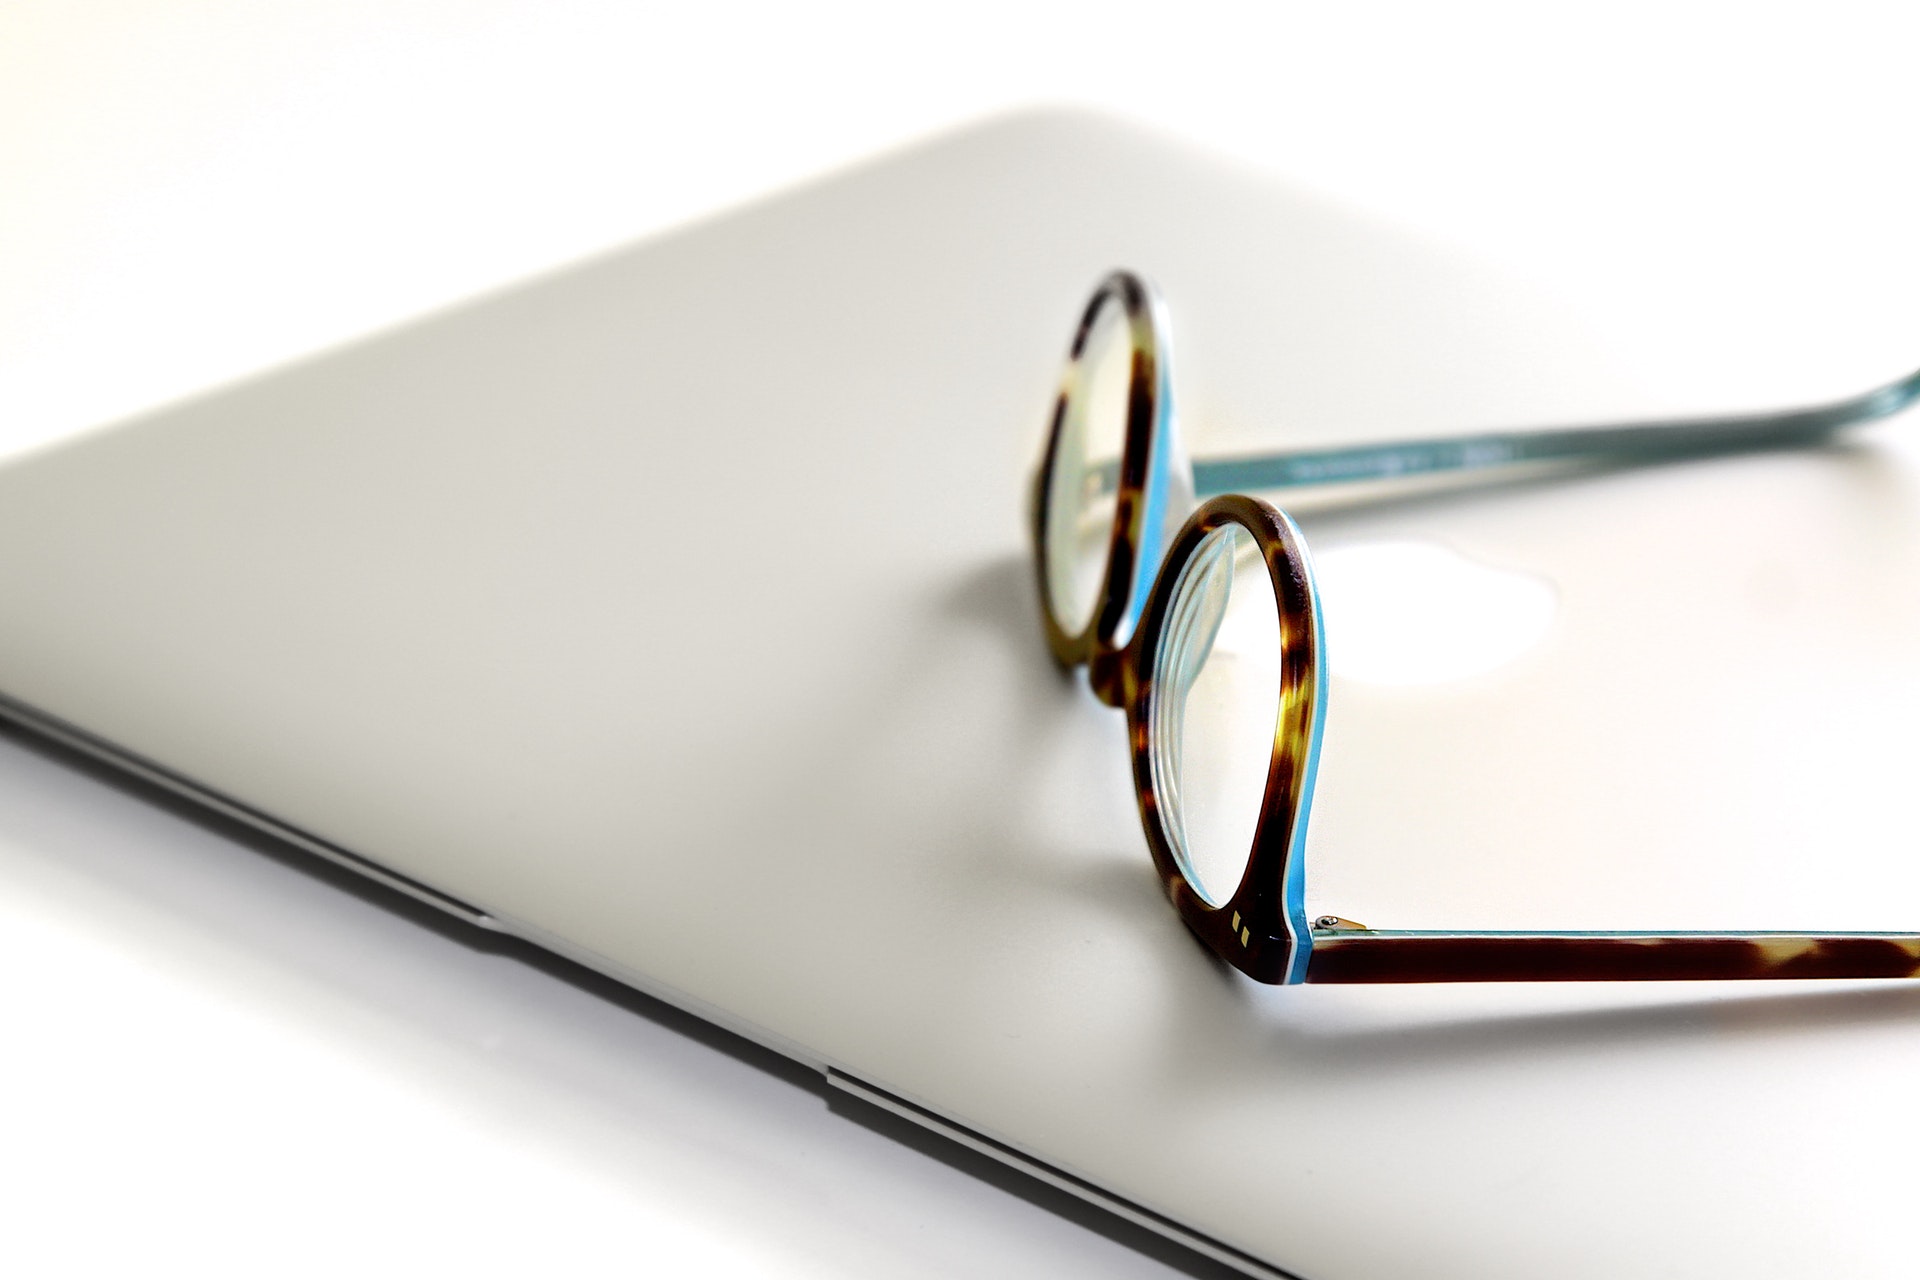 This is an image of a pair of glasses on top of an Apple laptop.